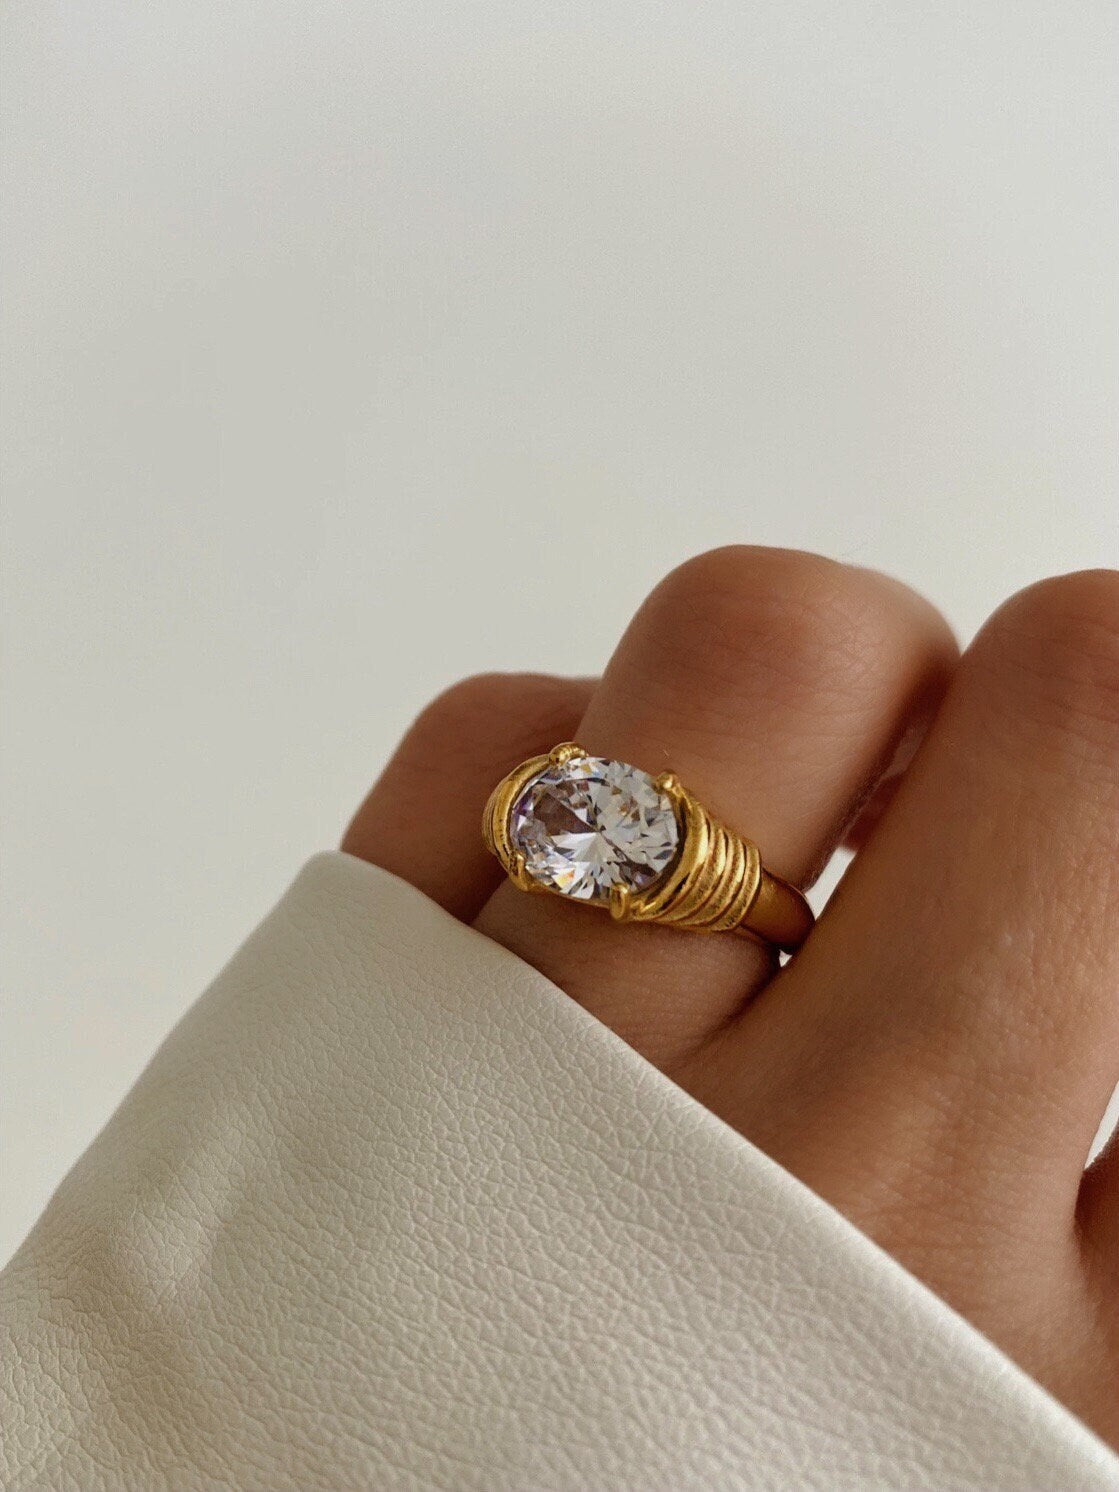 Gemstone Ring, Oval Cut CZ Ring, Gold CZ Ring, 18K Gold Oval Ring, Cubic Zirconia Ring, Statement Ring, Stacking Ring